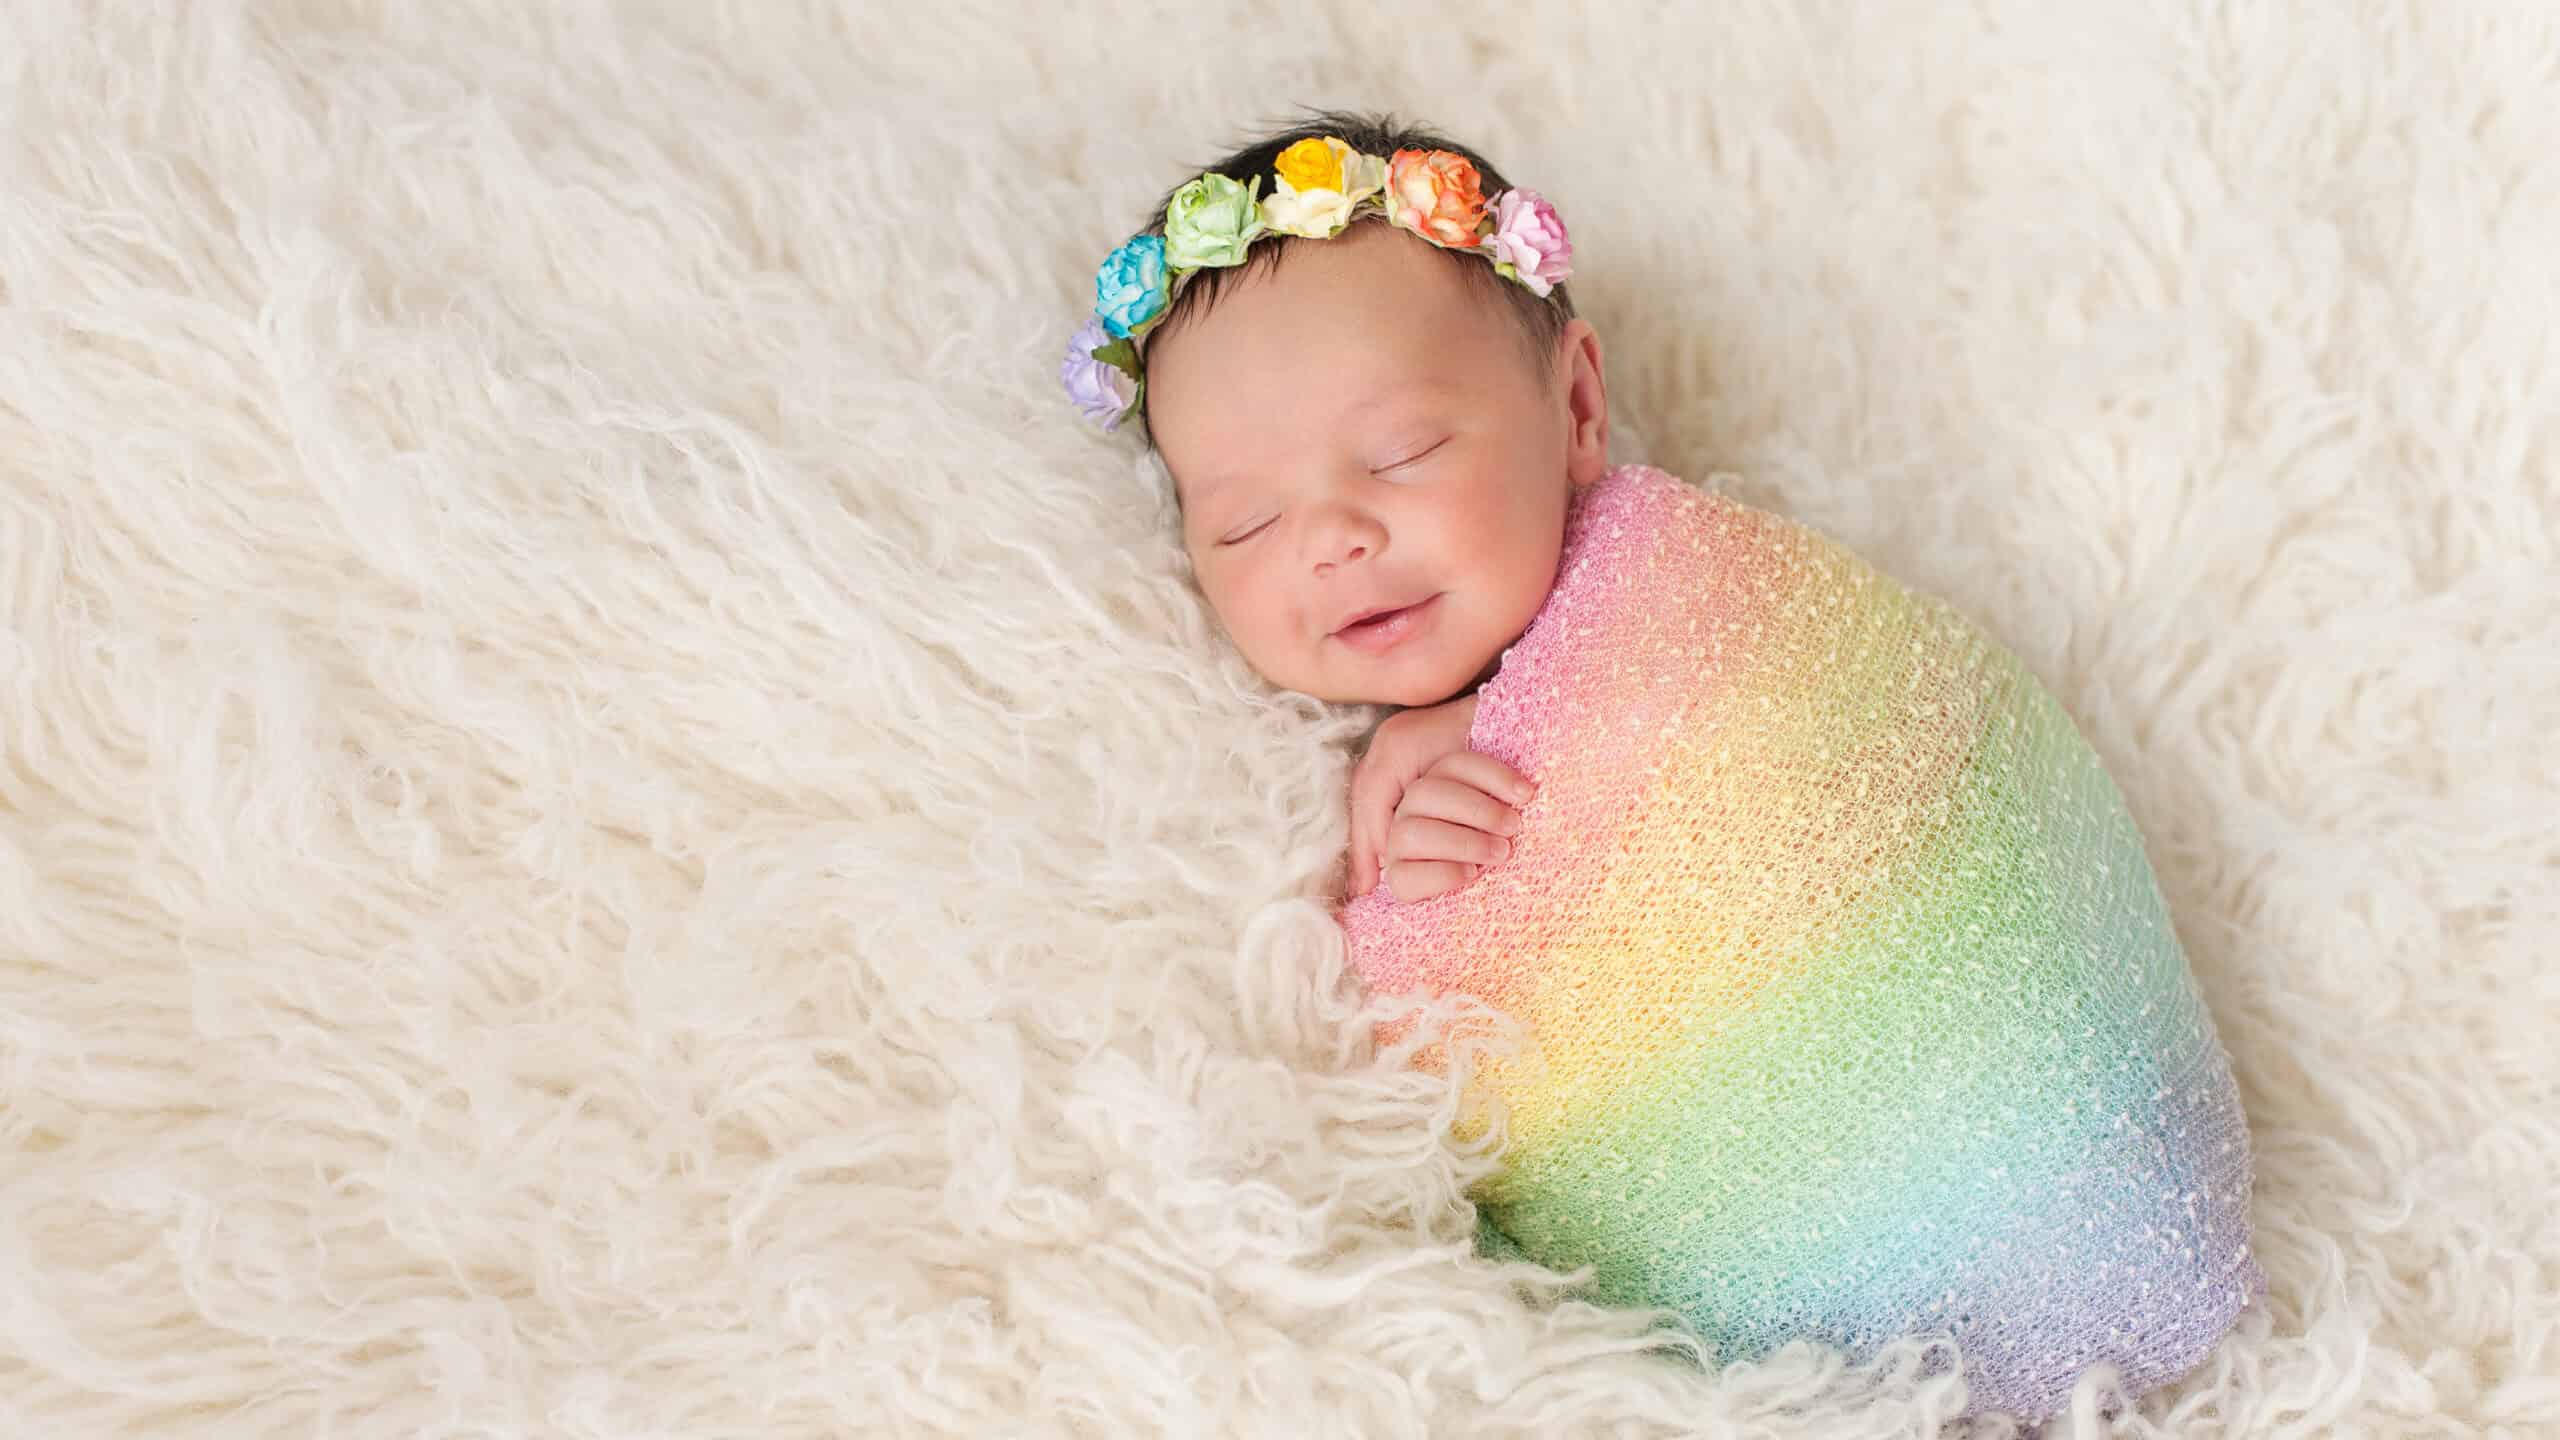 A smiling nine day old newborn baby girl bundled up in a rainbow colored swaddle. She is lying on a cream colored flokati (sheepskin) rug and wearing a crown made of roses.